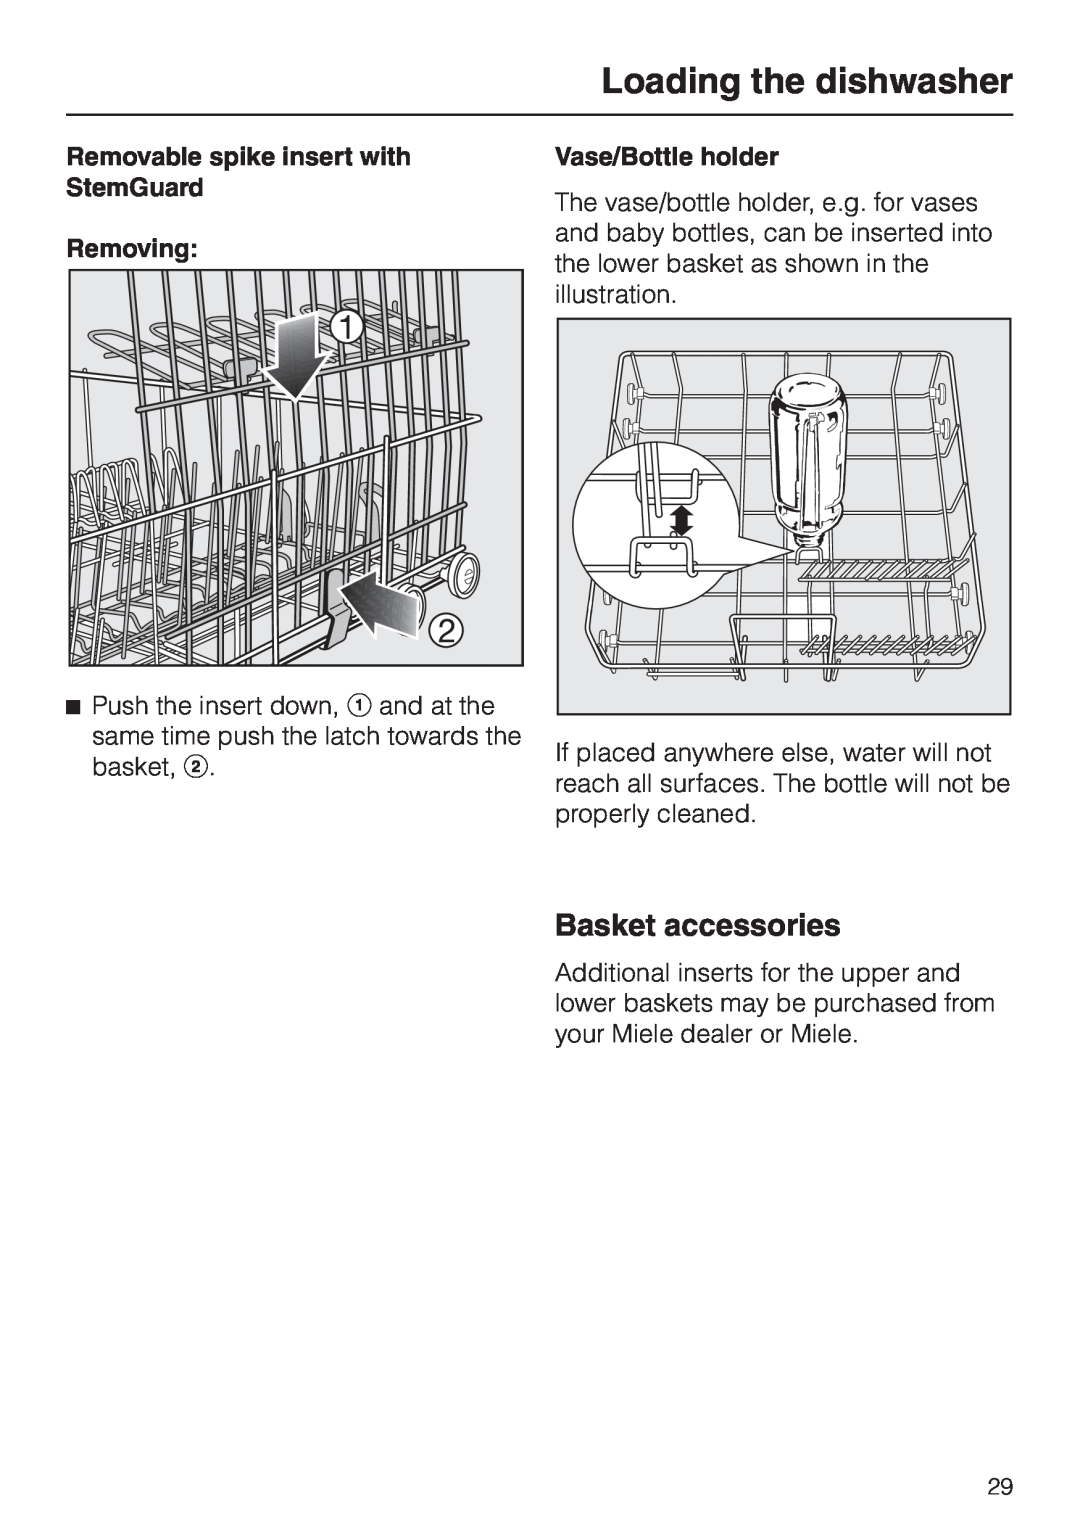 Miele G 2830 SCi manual Basket accessories, Loading the dishwasher, Removable spike insert with StemGuard, Removing 